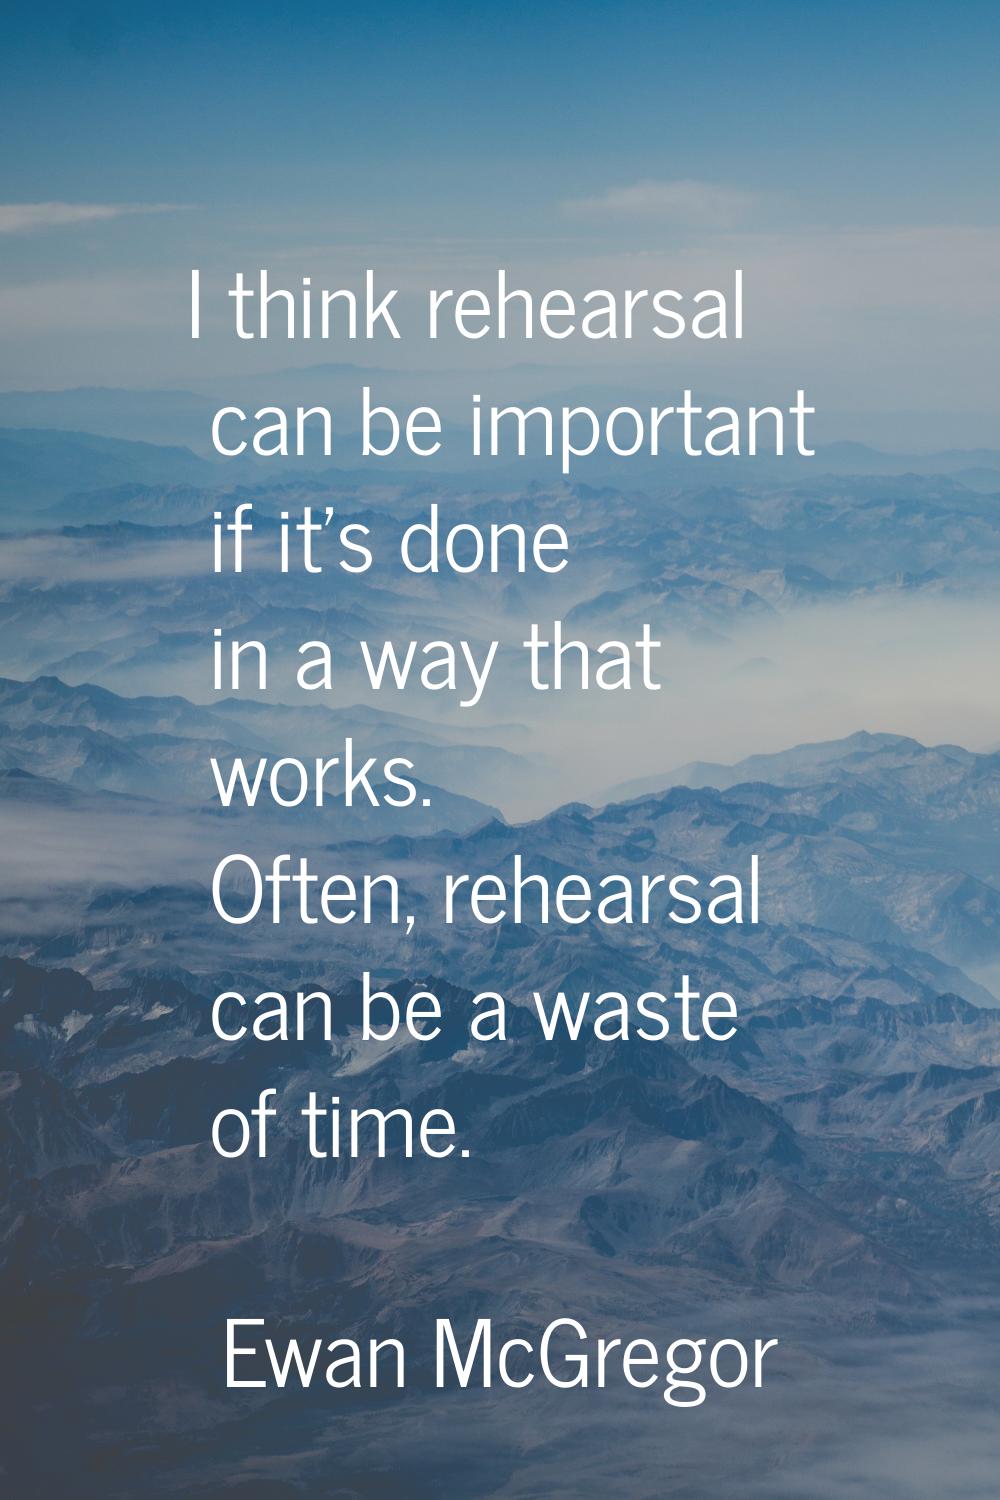 I think rehearsal can be important if it's done in a way that works. Often, rehearsal can be a wast